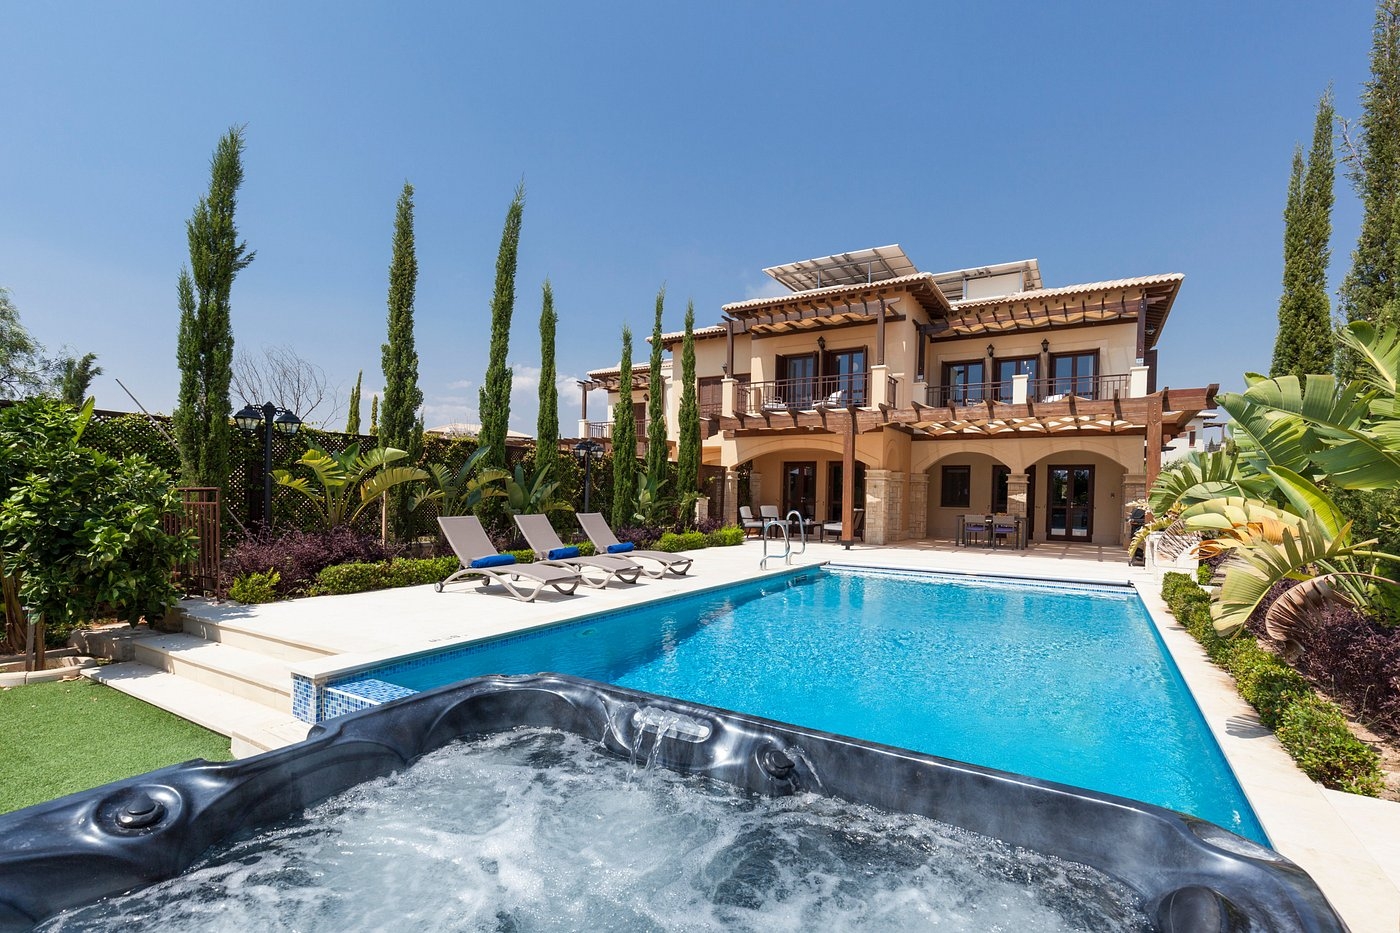 APHRODITE HILLS HOLIDAY RESIDENCES & APARTMENTS